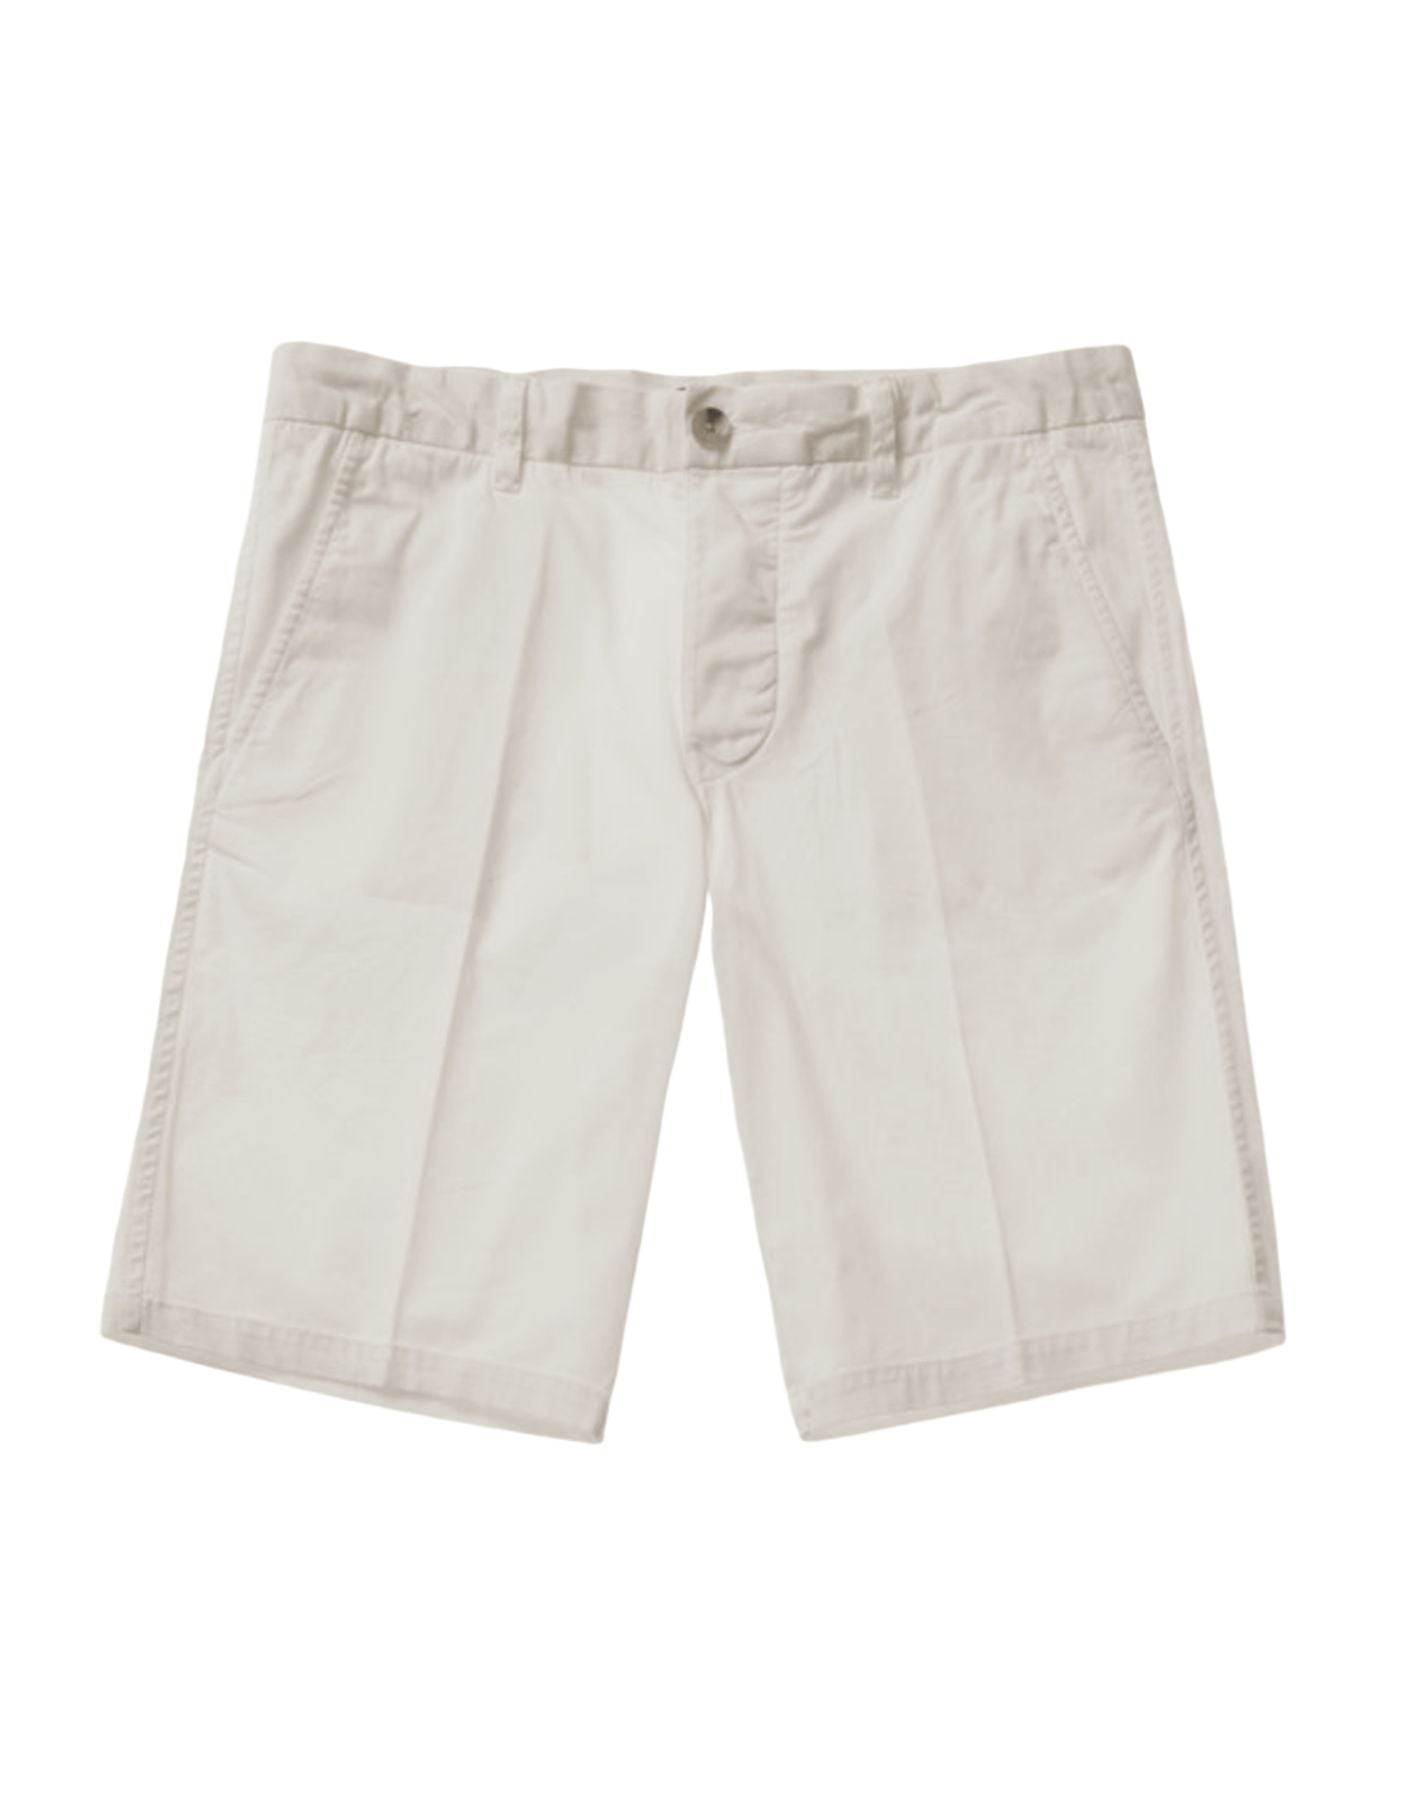 Shorts pour homme 24SBLUP02406 006855 102 Blauer